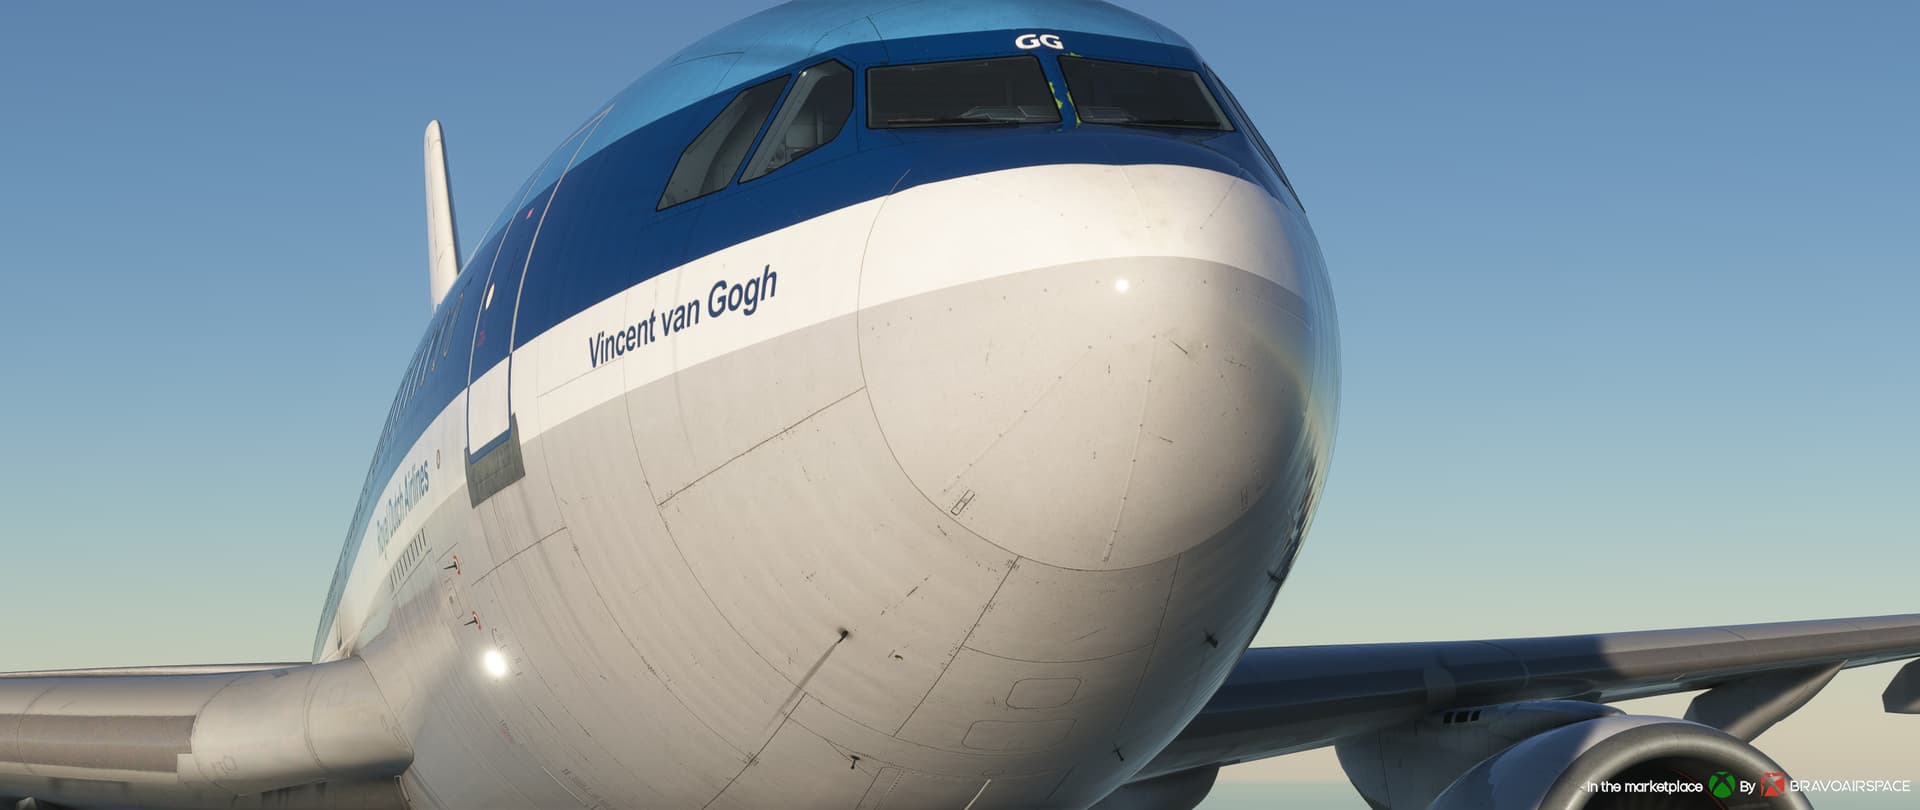 A head on view of an airliner with a white and blue livery. The nose of the plane has the words "Vincent van Gogh" painted on it.